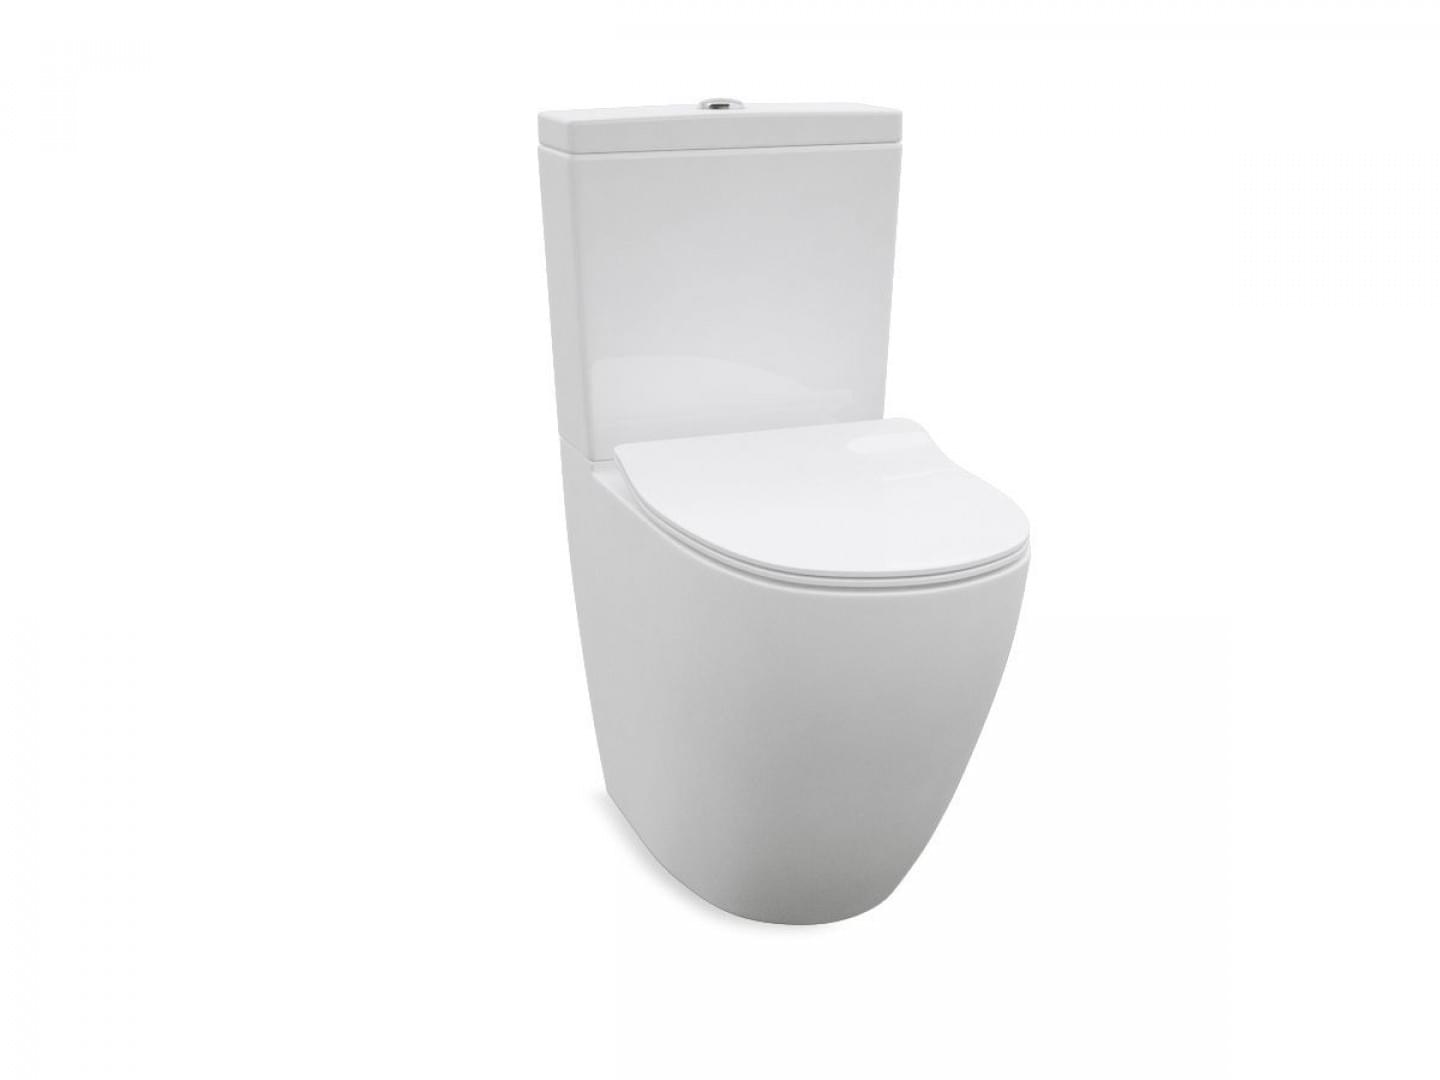 Enware Wall Faced Rimless Close-Coupled Toilet Suite – Raised - EBTW610R-C from Enware